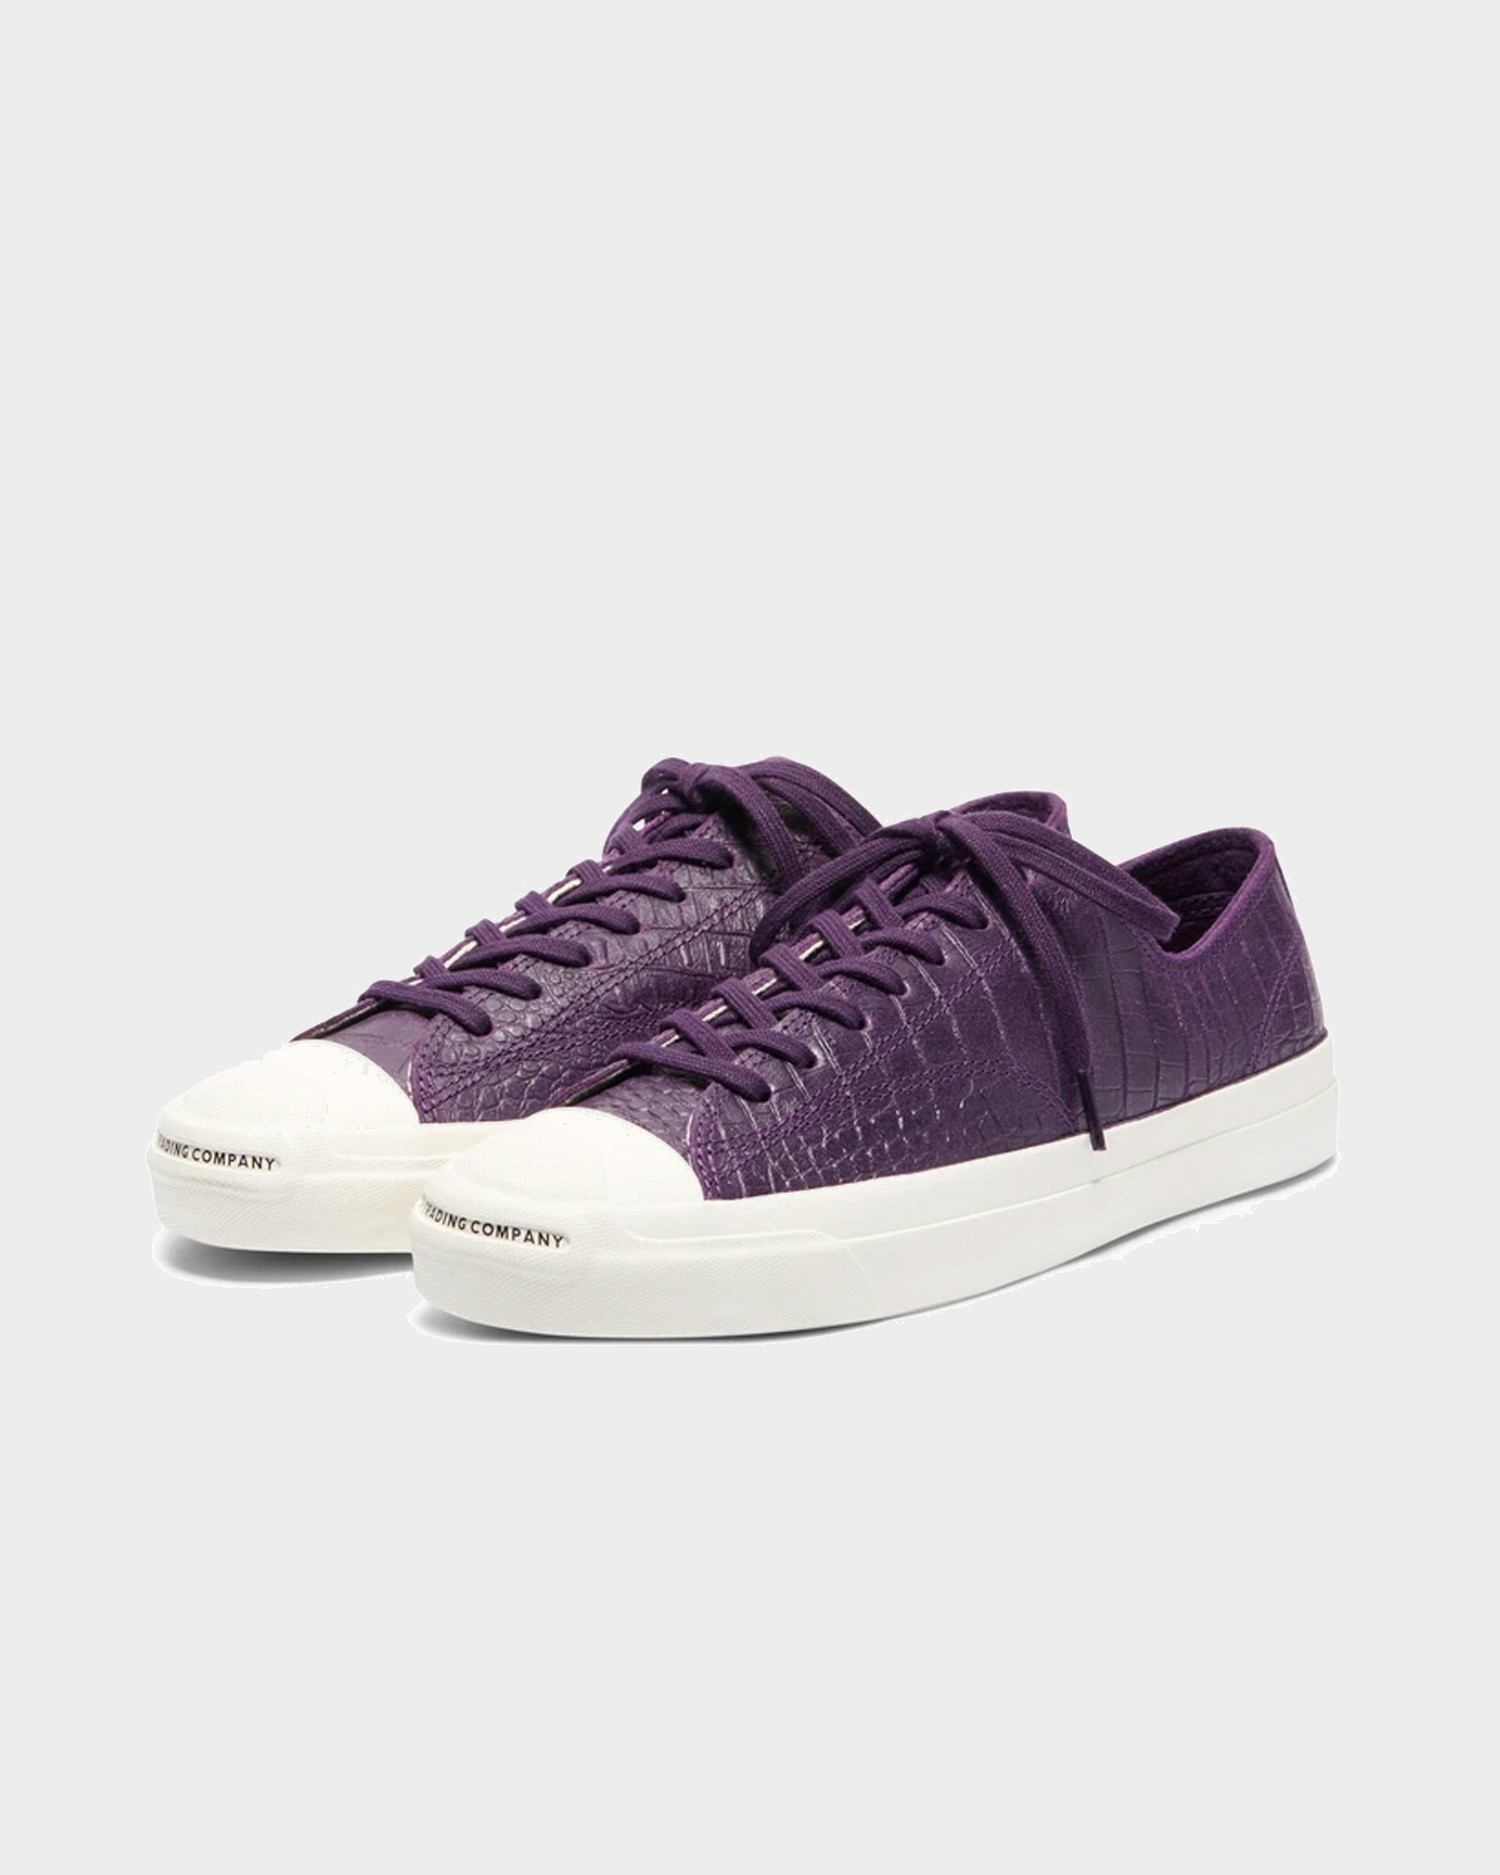 jack purcell pro converse